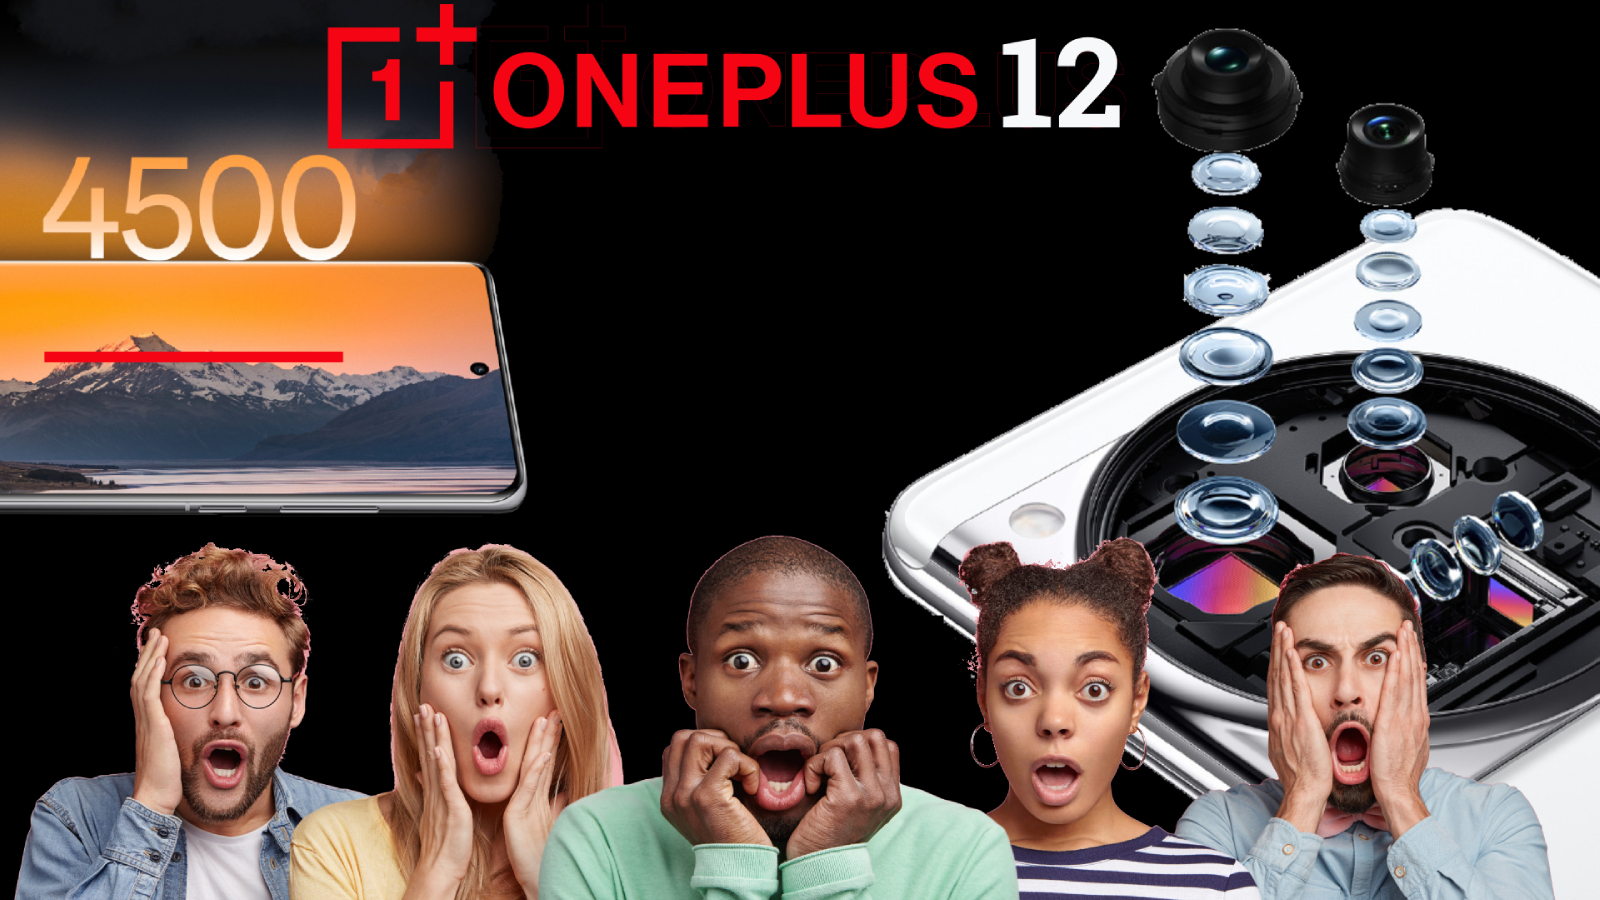 OnePlus 12's crazy 4,500 nit display outshines iPhone 15 Pro Max